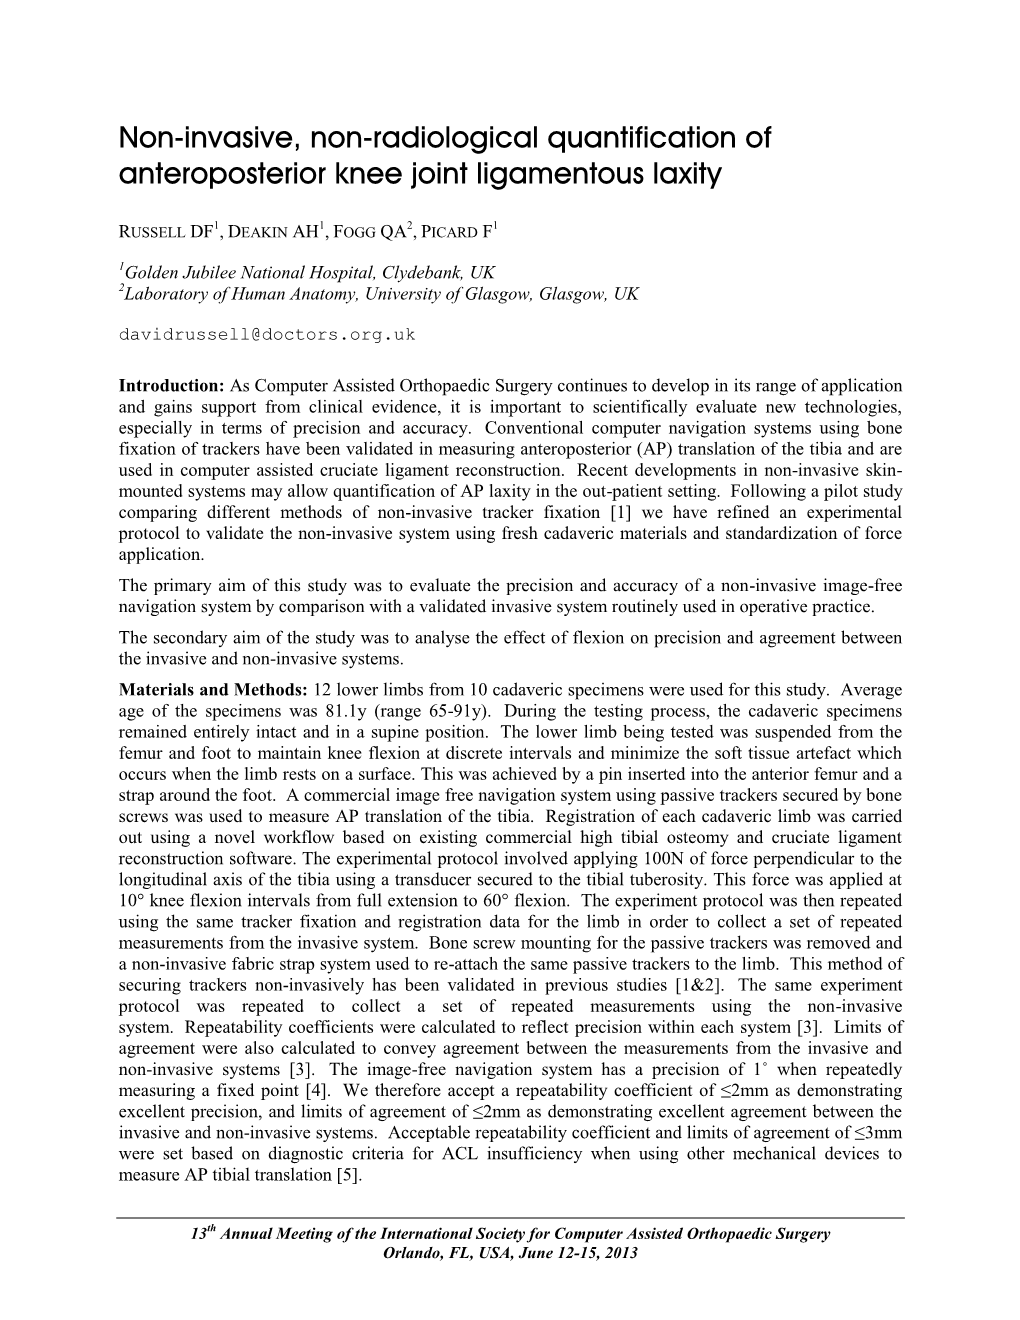 Non-Invasive, Non-Radiological Quantification of Anteroposterior Knee Joint Ligamentous Laxity